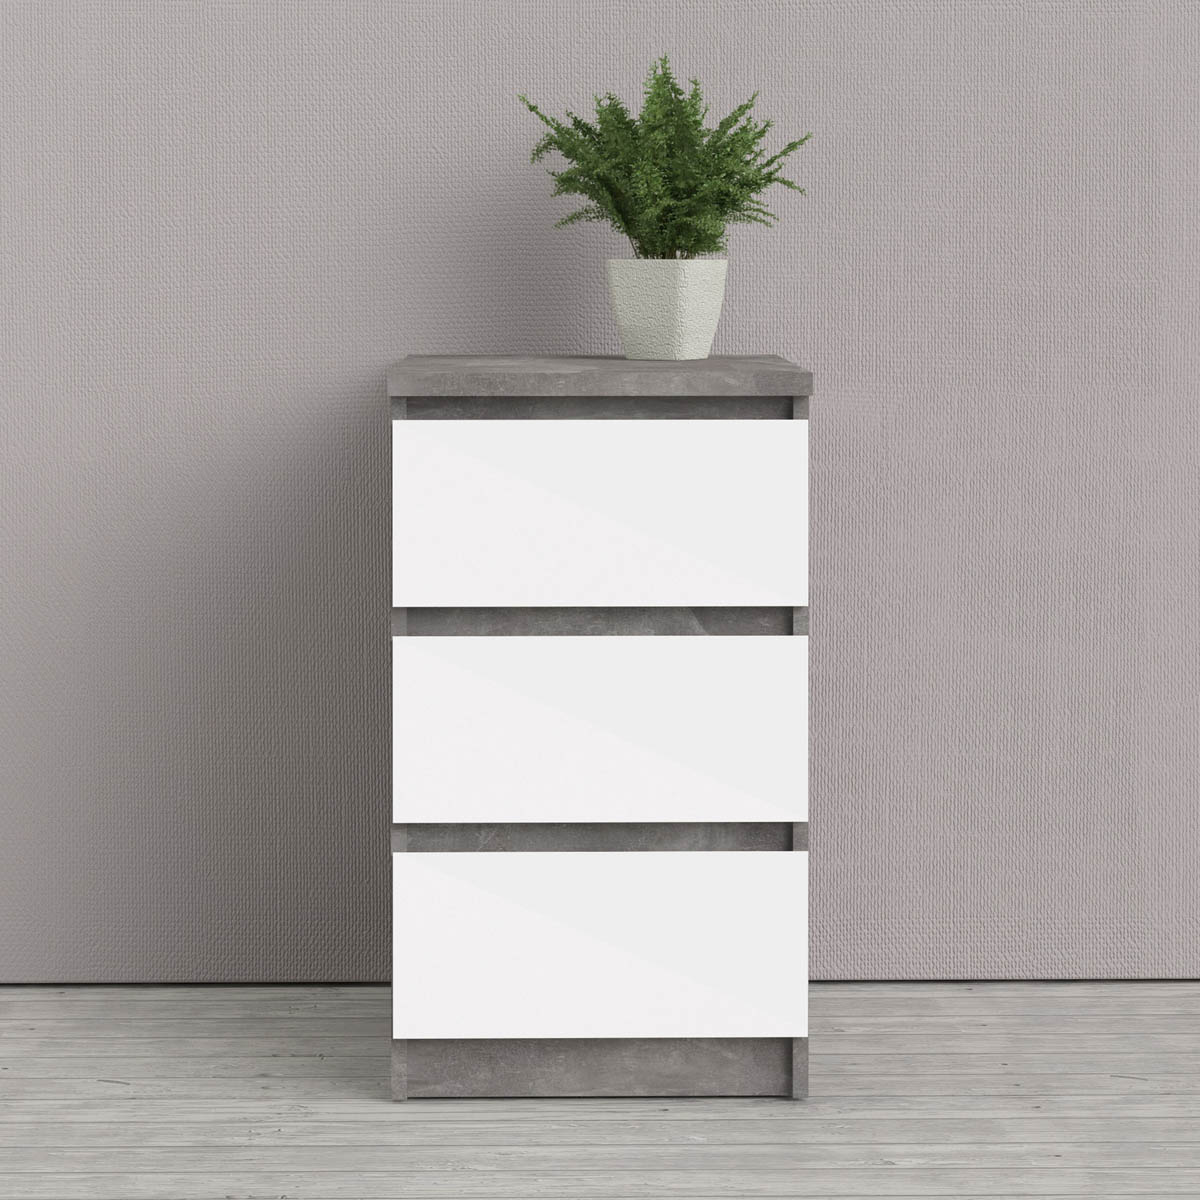 Naia Bedside - 3 Drawers in Concrete and White High Gloss